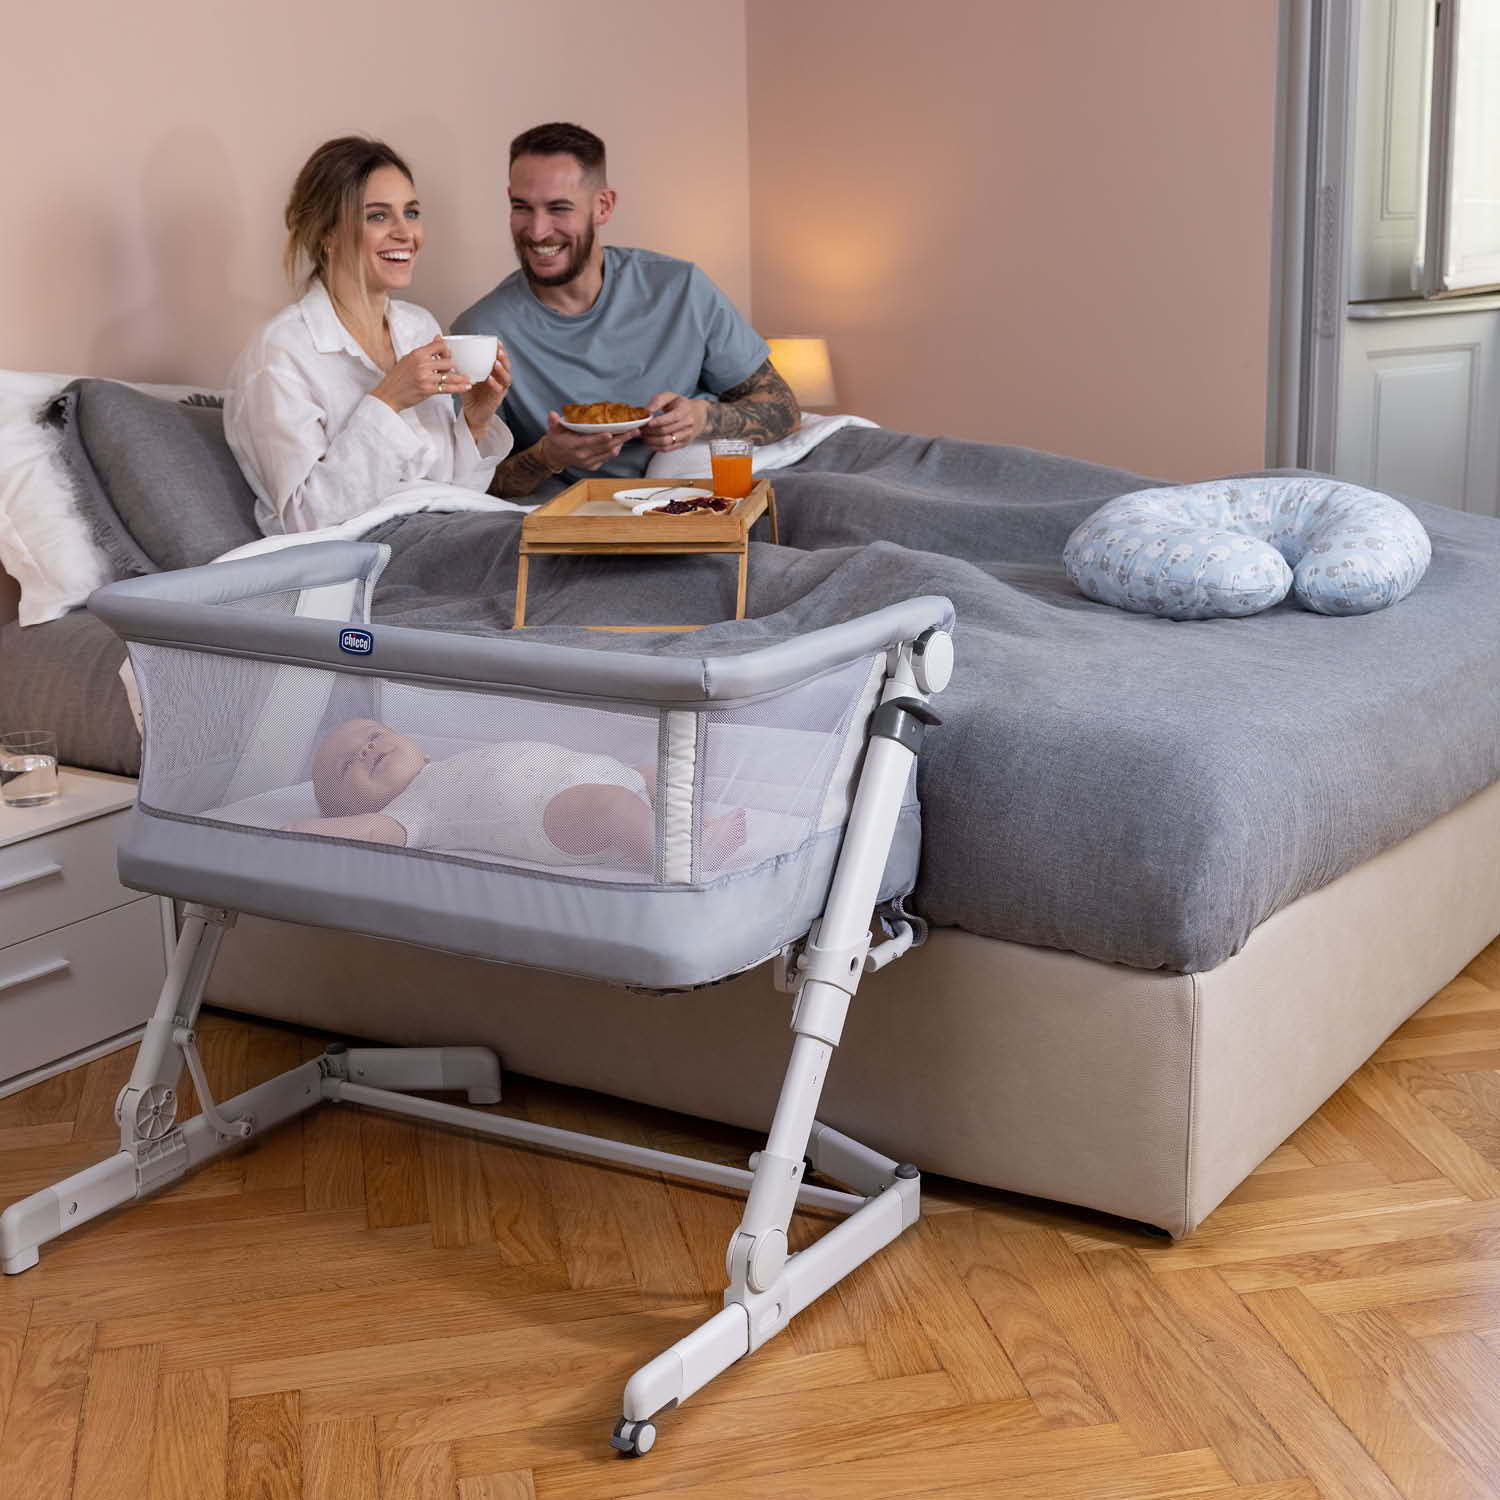 Chicco next2me 10840 Review, Bassinet and bedside sleeper